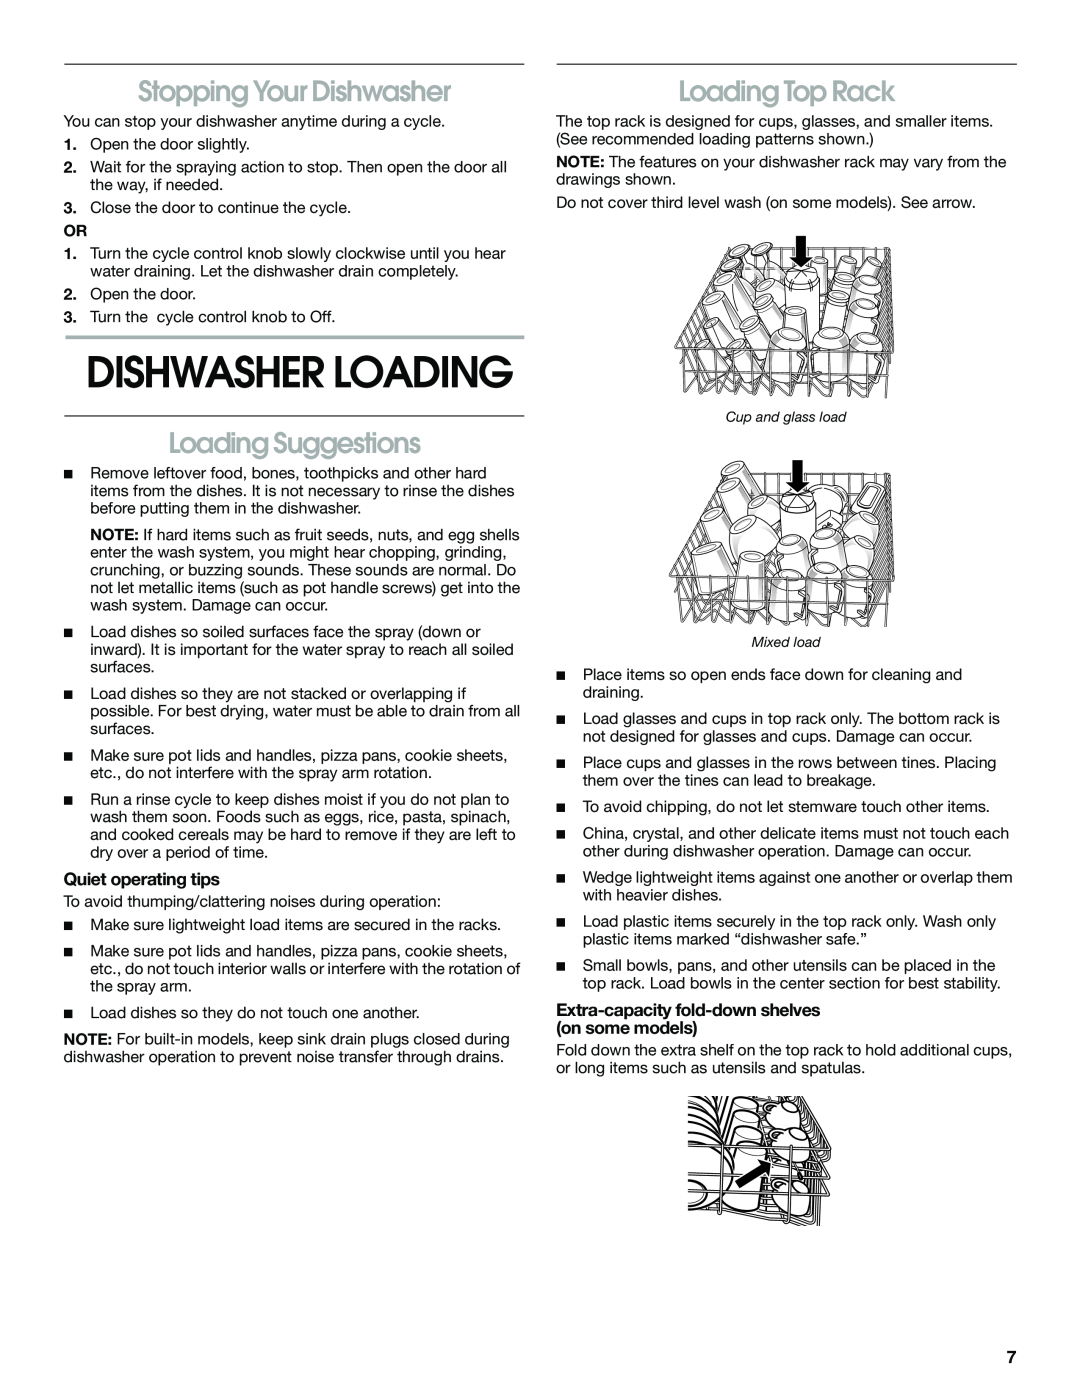 Estate TUD4700 Stopping Your Dishwasher, Loading Suggestions, Loading Top Rack, Quiet operating tips, Dishwasher Loading 